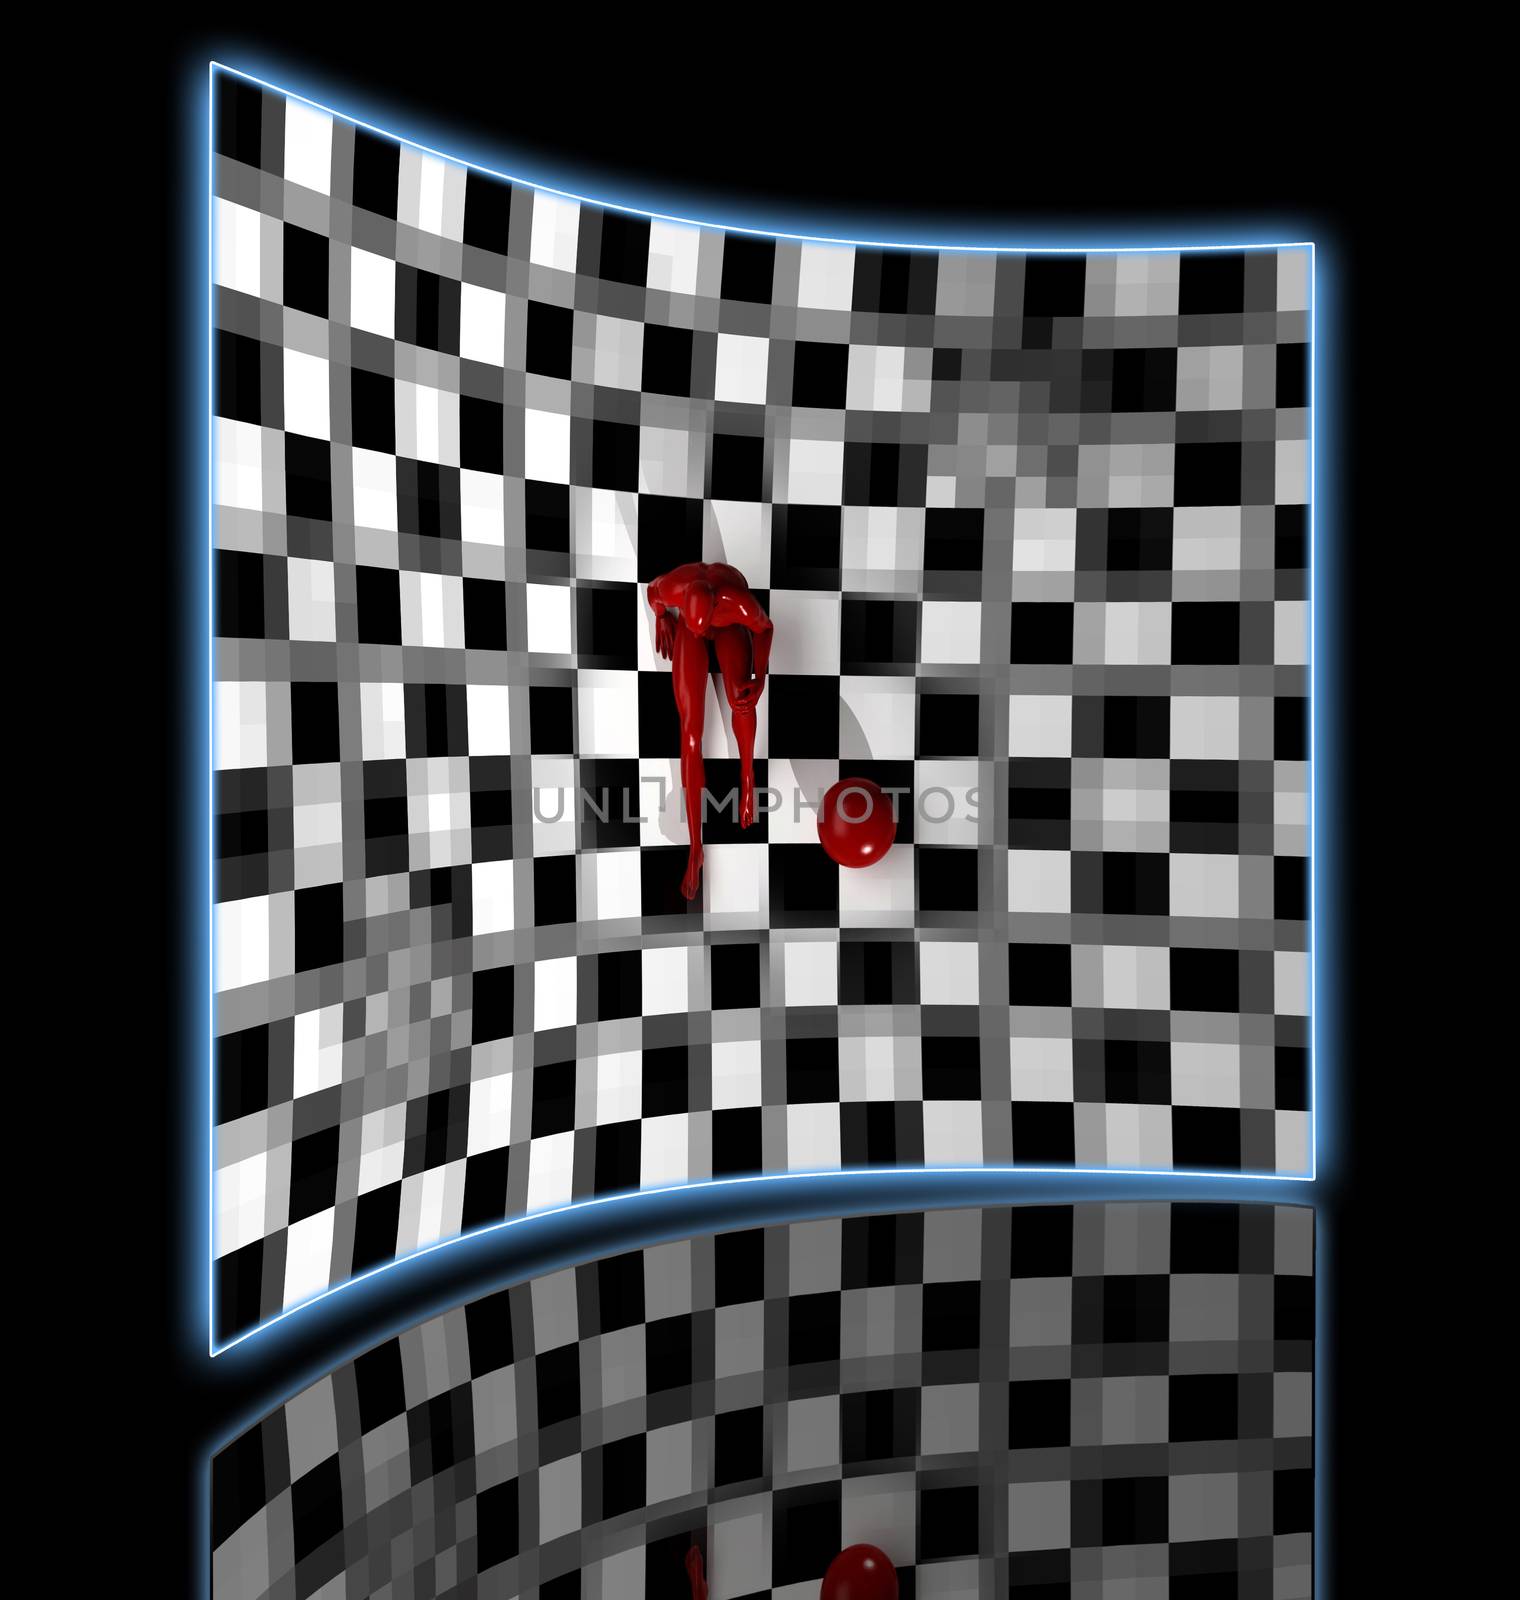 Checkered composition with man end ball   made in 3d